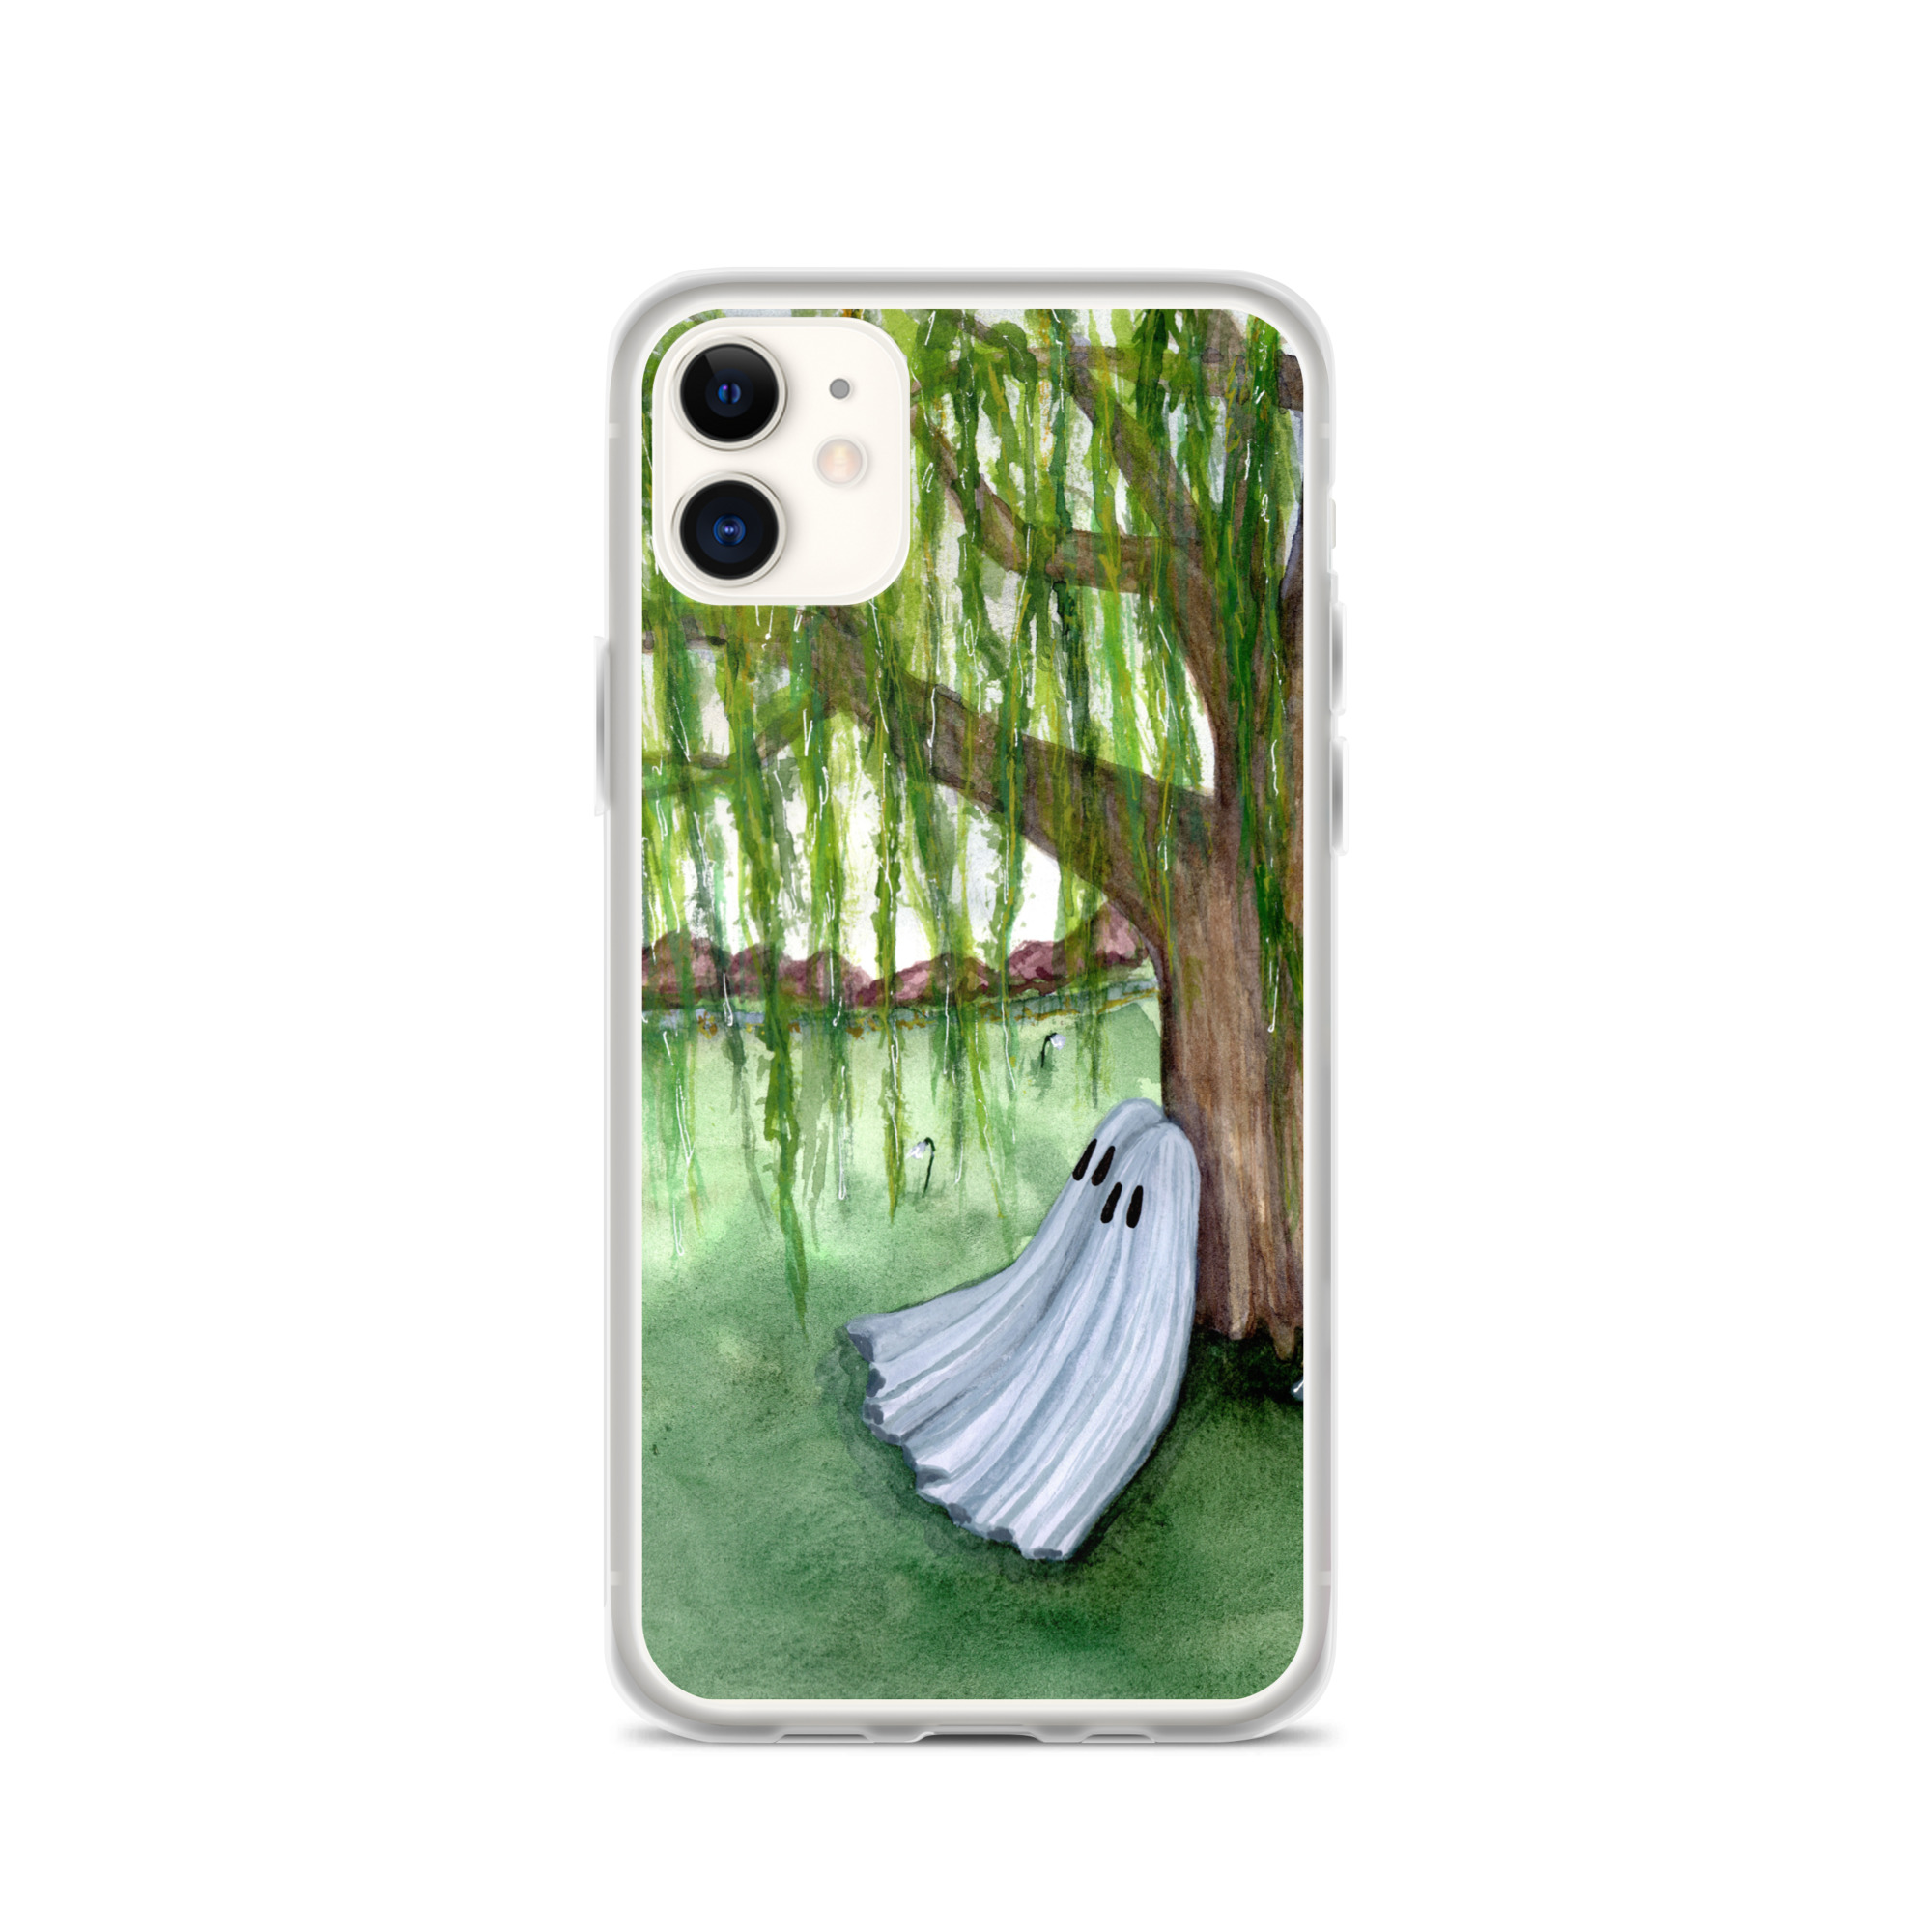 clear-case-for-iphone-iphone-11-case-on-phone-642b421819924.jpg